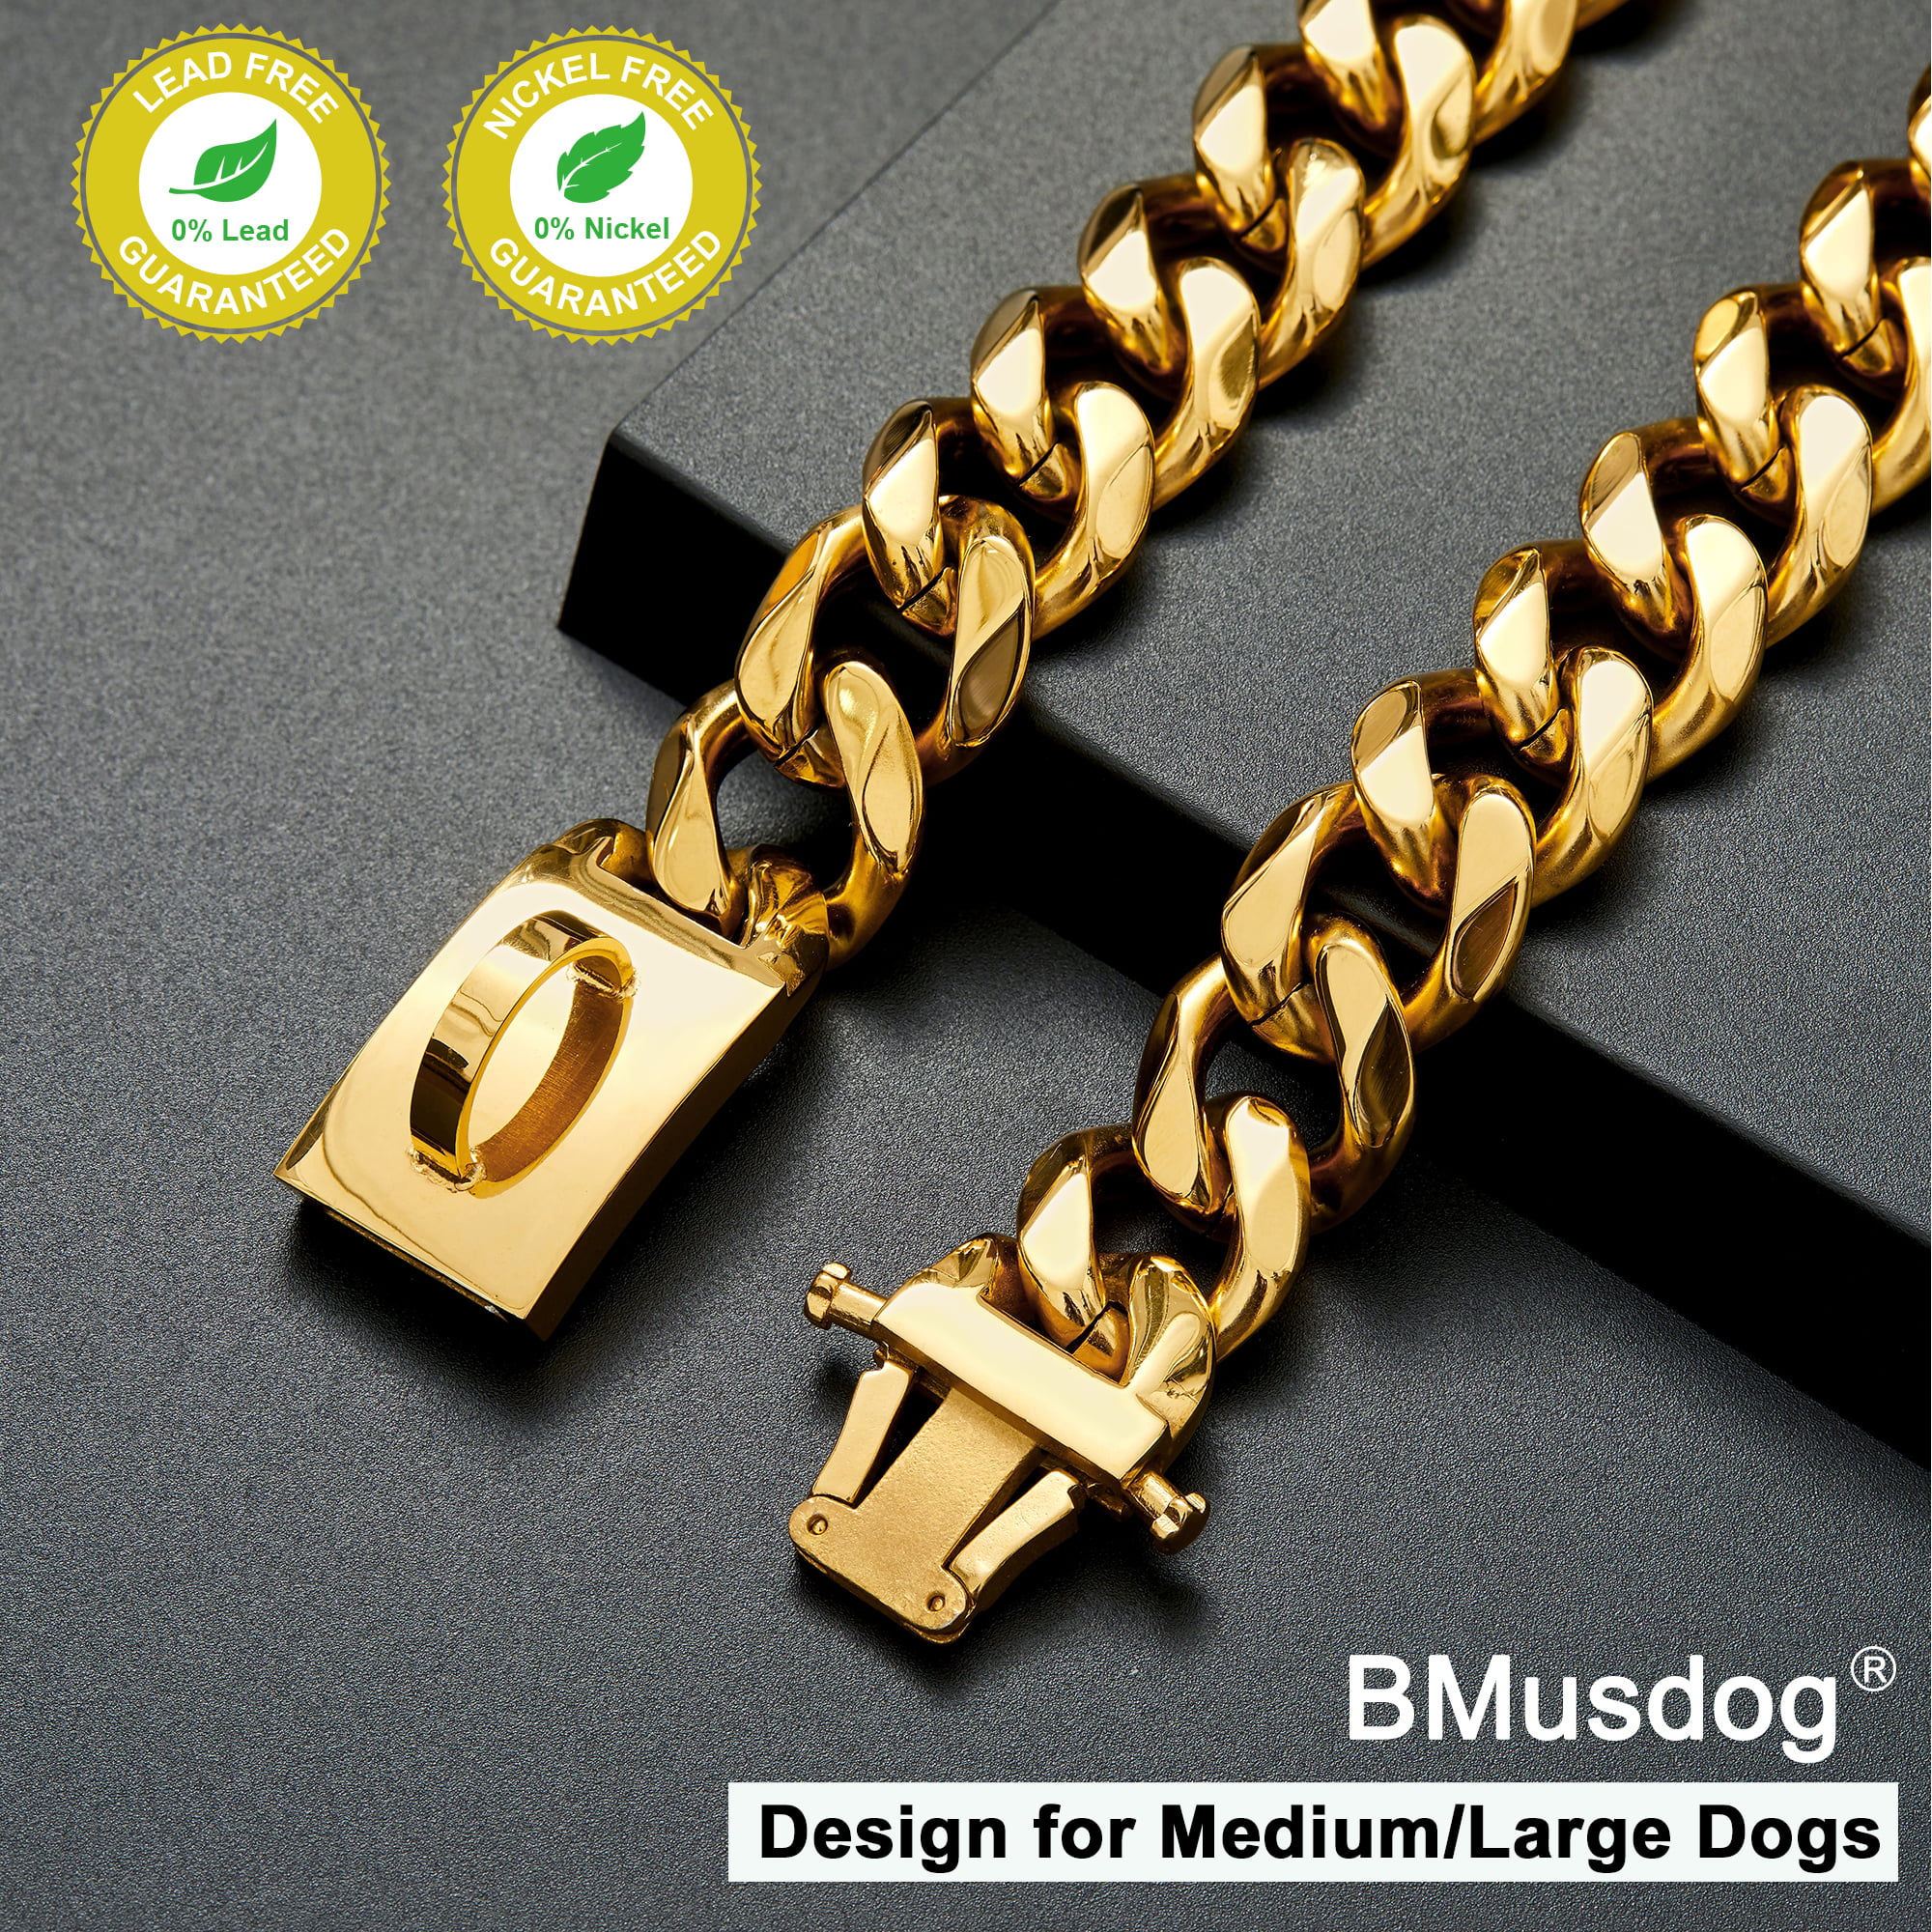 W/W Lifetime Dog Chain Collar Walking Training Collar with Design Secure Buckle 19MM Black Cuban Link Strong Heavy Duty Chew Proof Chain for Medium Large Dogs American Pitbull German Shepherd